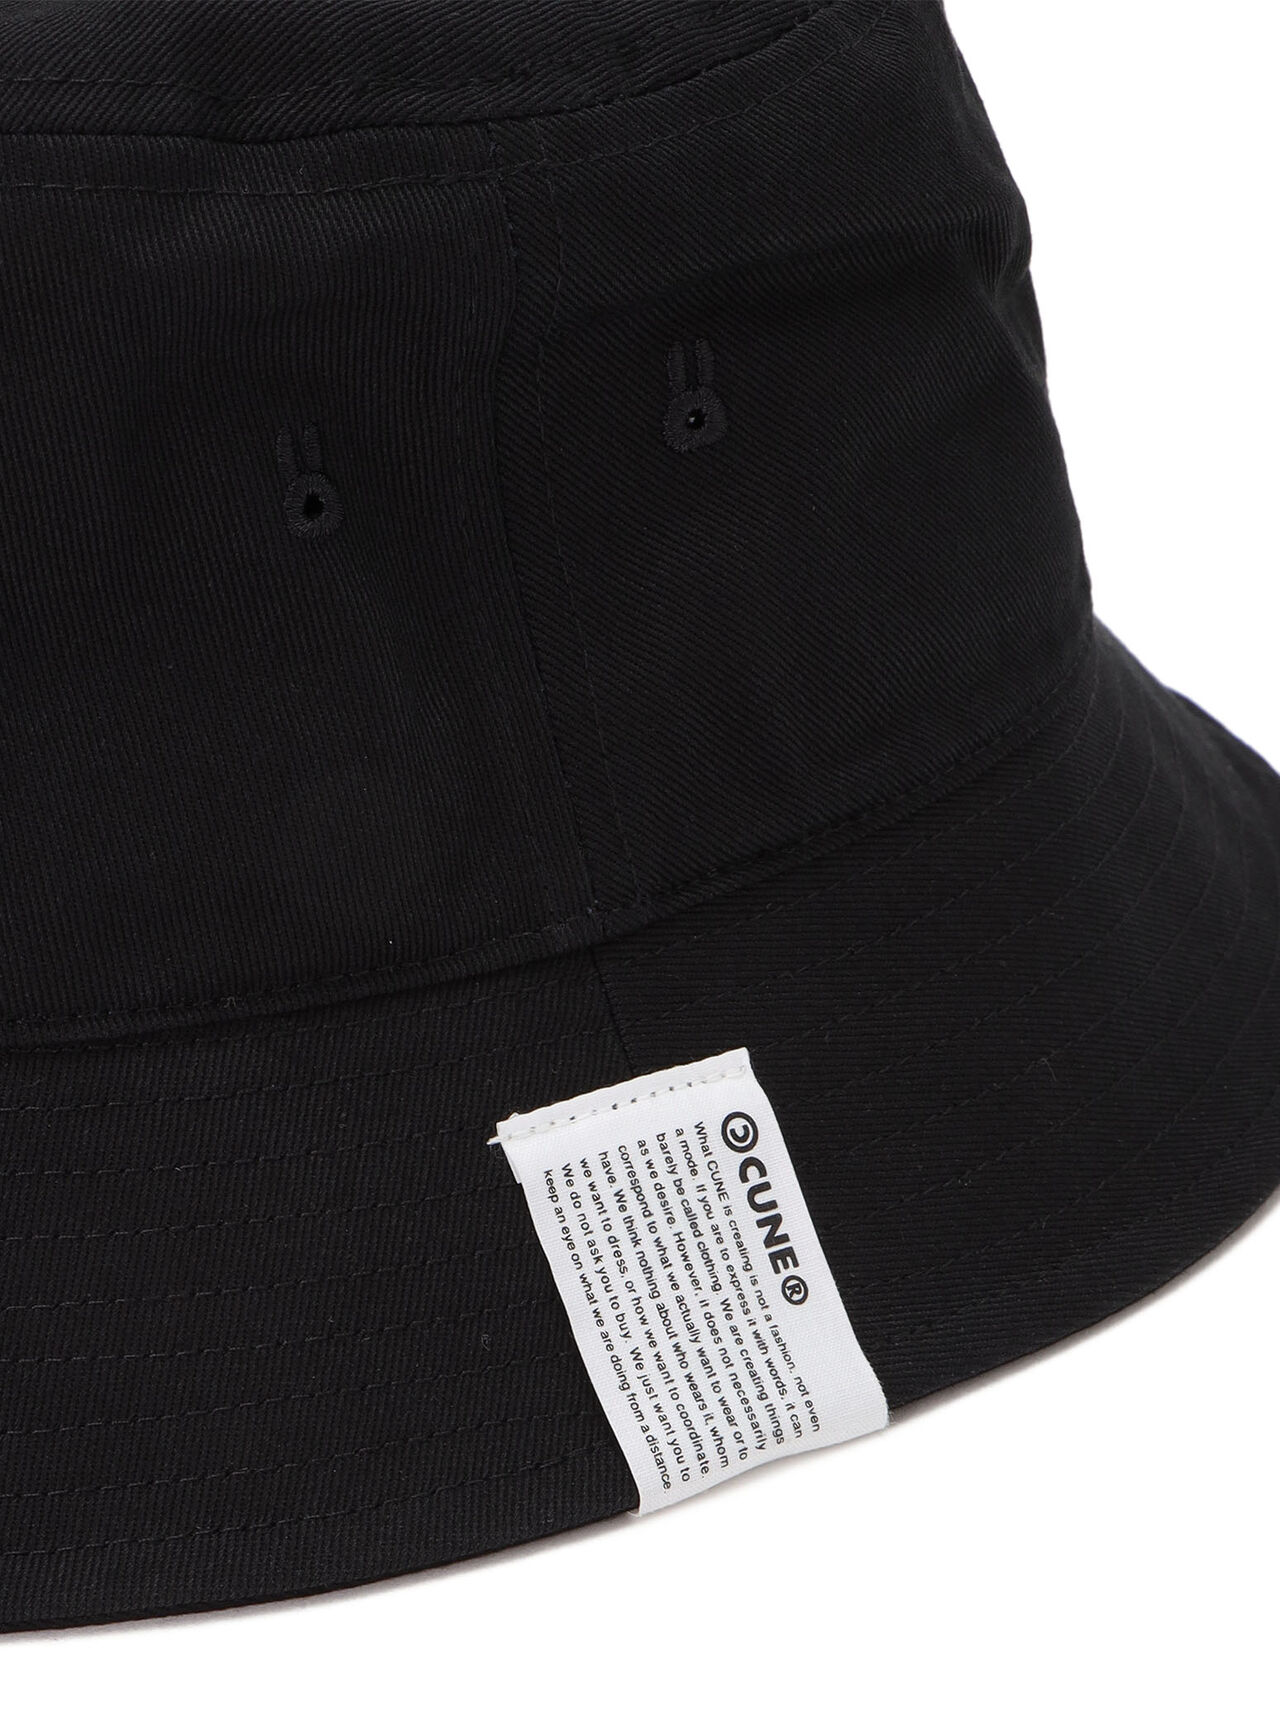 Embroidered Bucket Hat Dashi,ONE, large image number 3